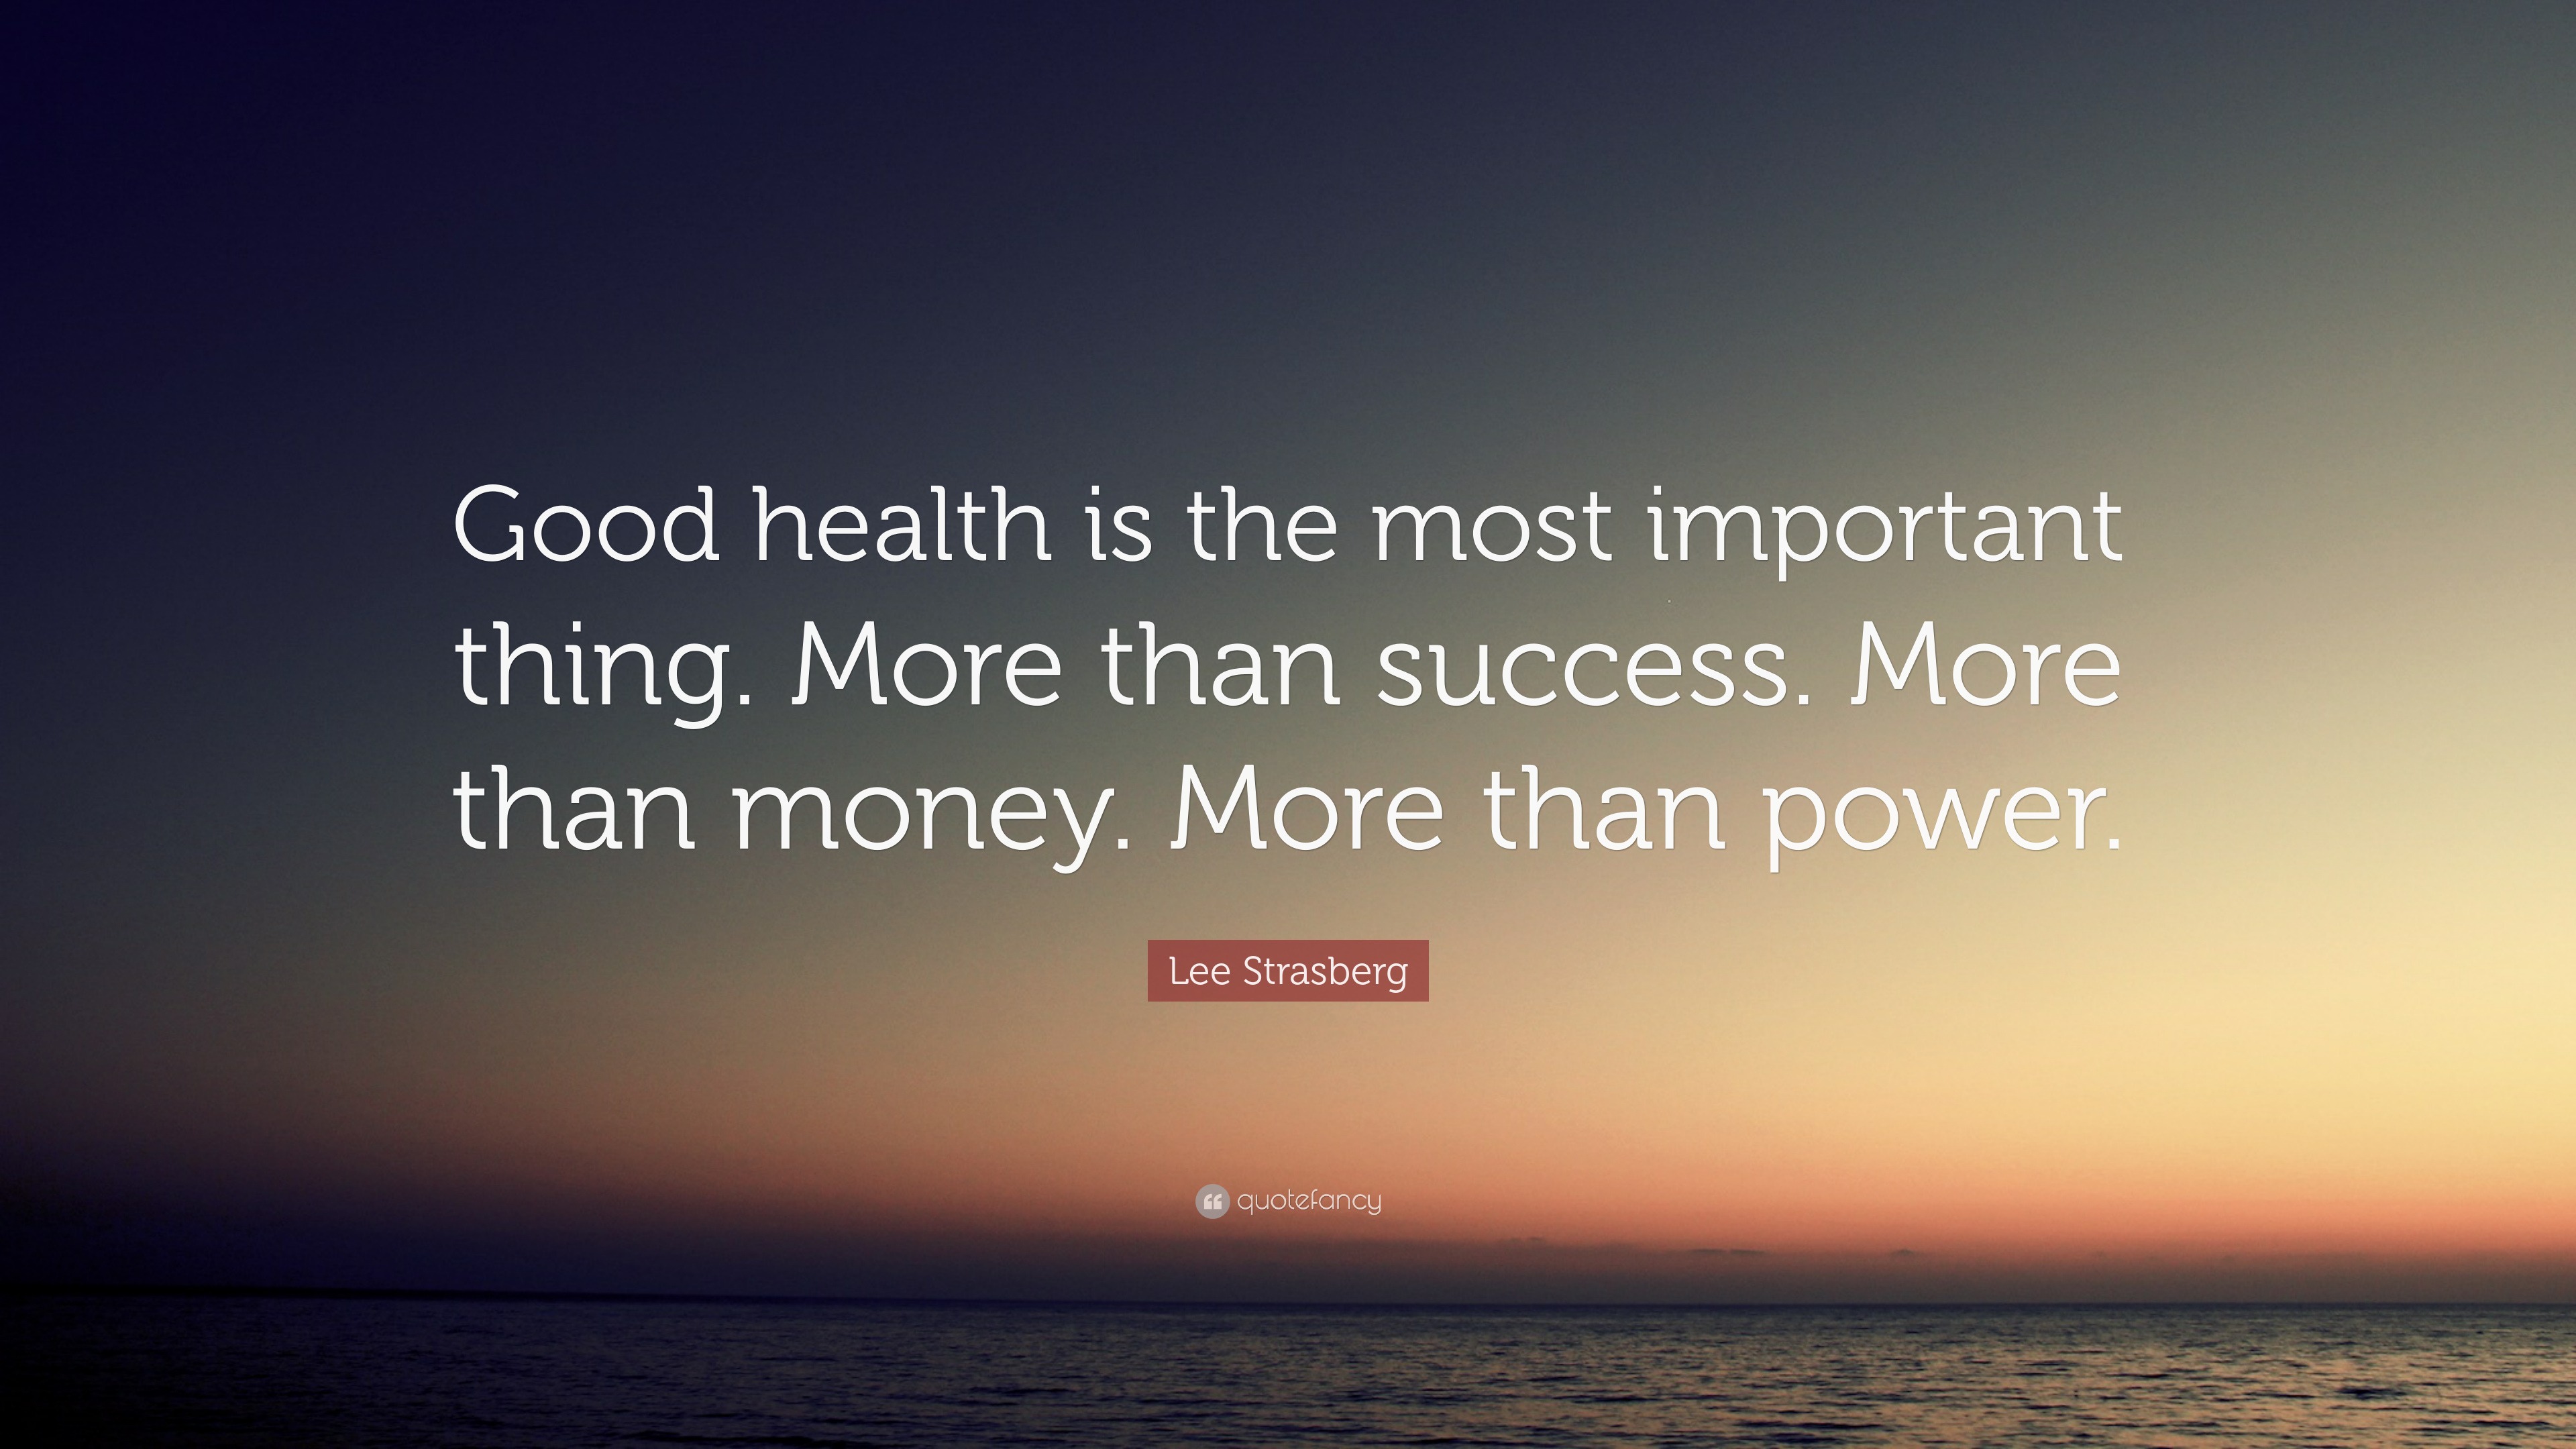 Is It More Valuable Than Good Health